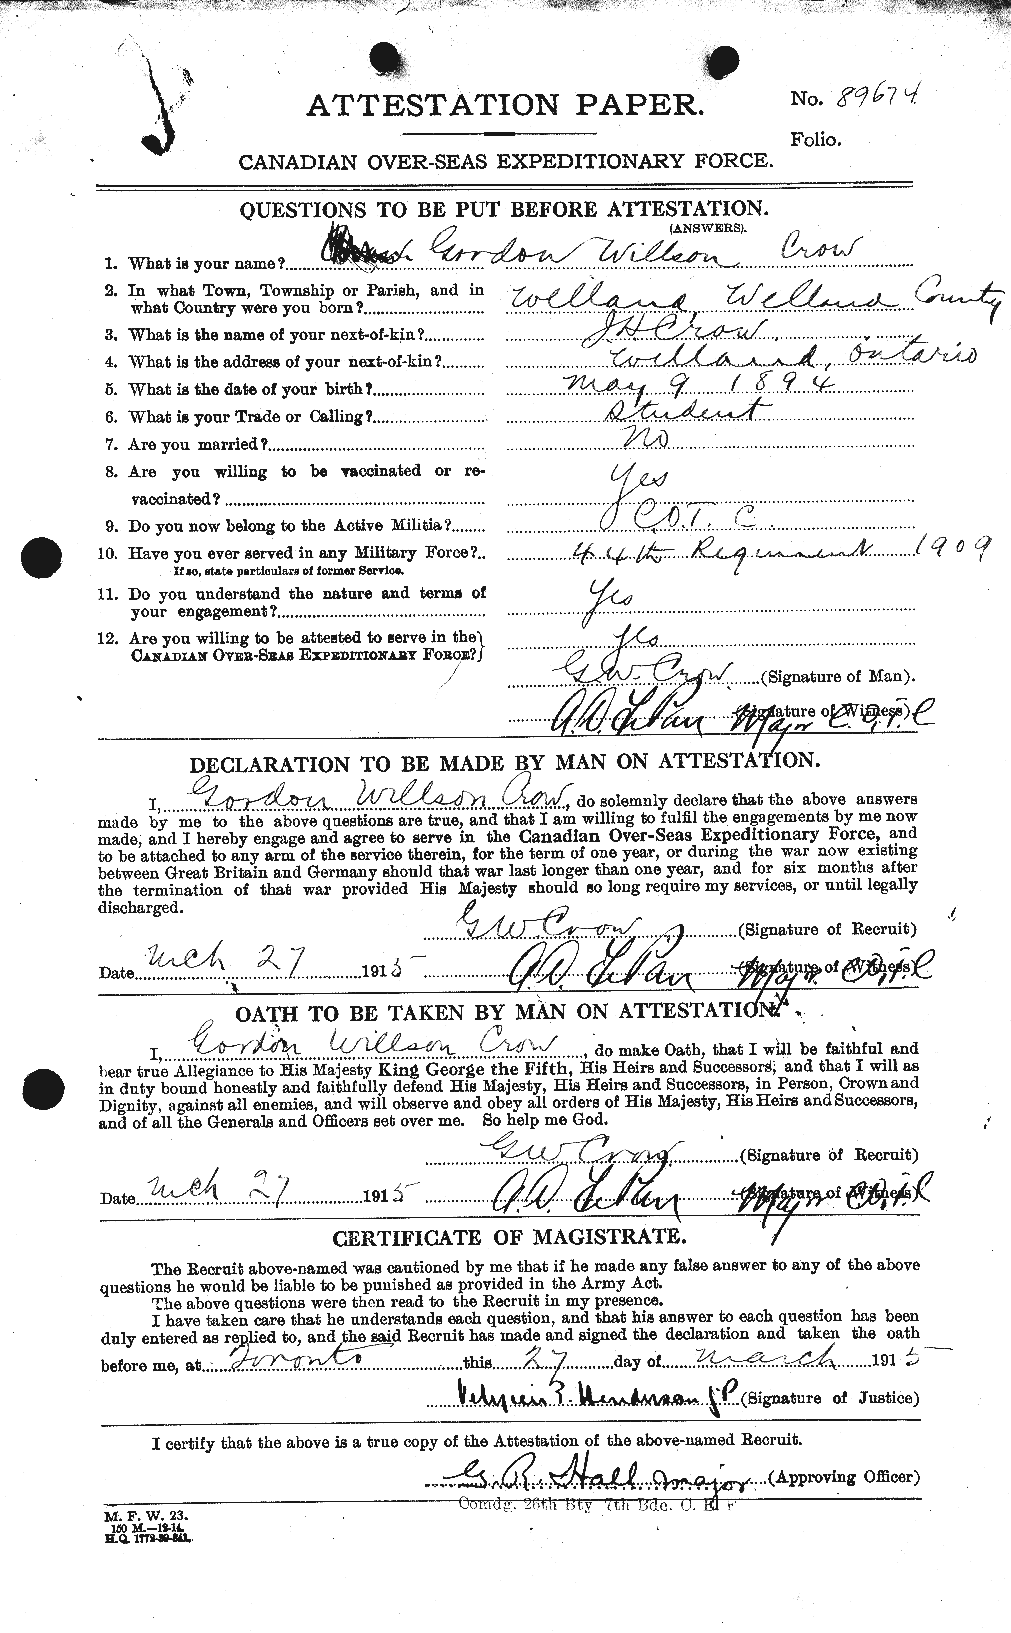 Personnel Records of the First World War - CEF 065548a